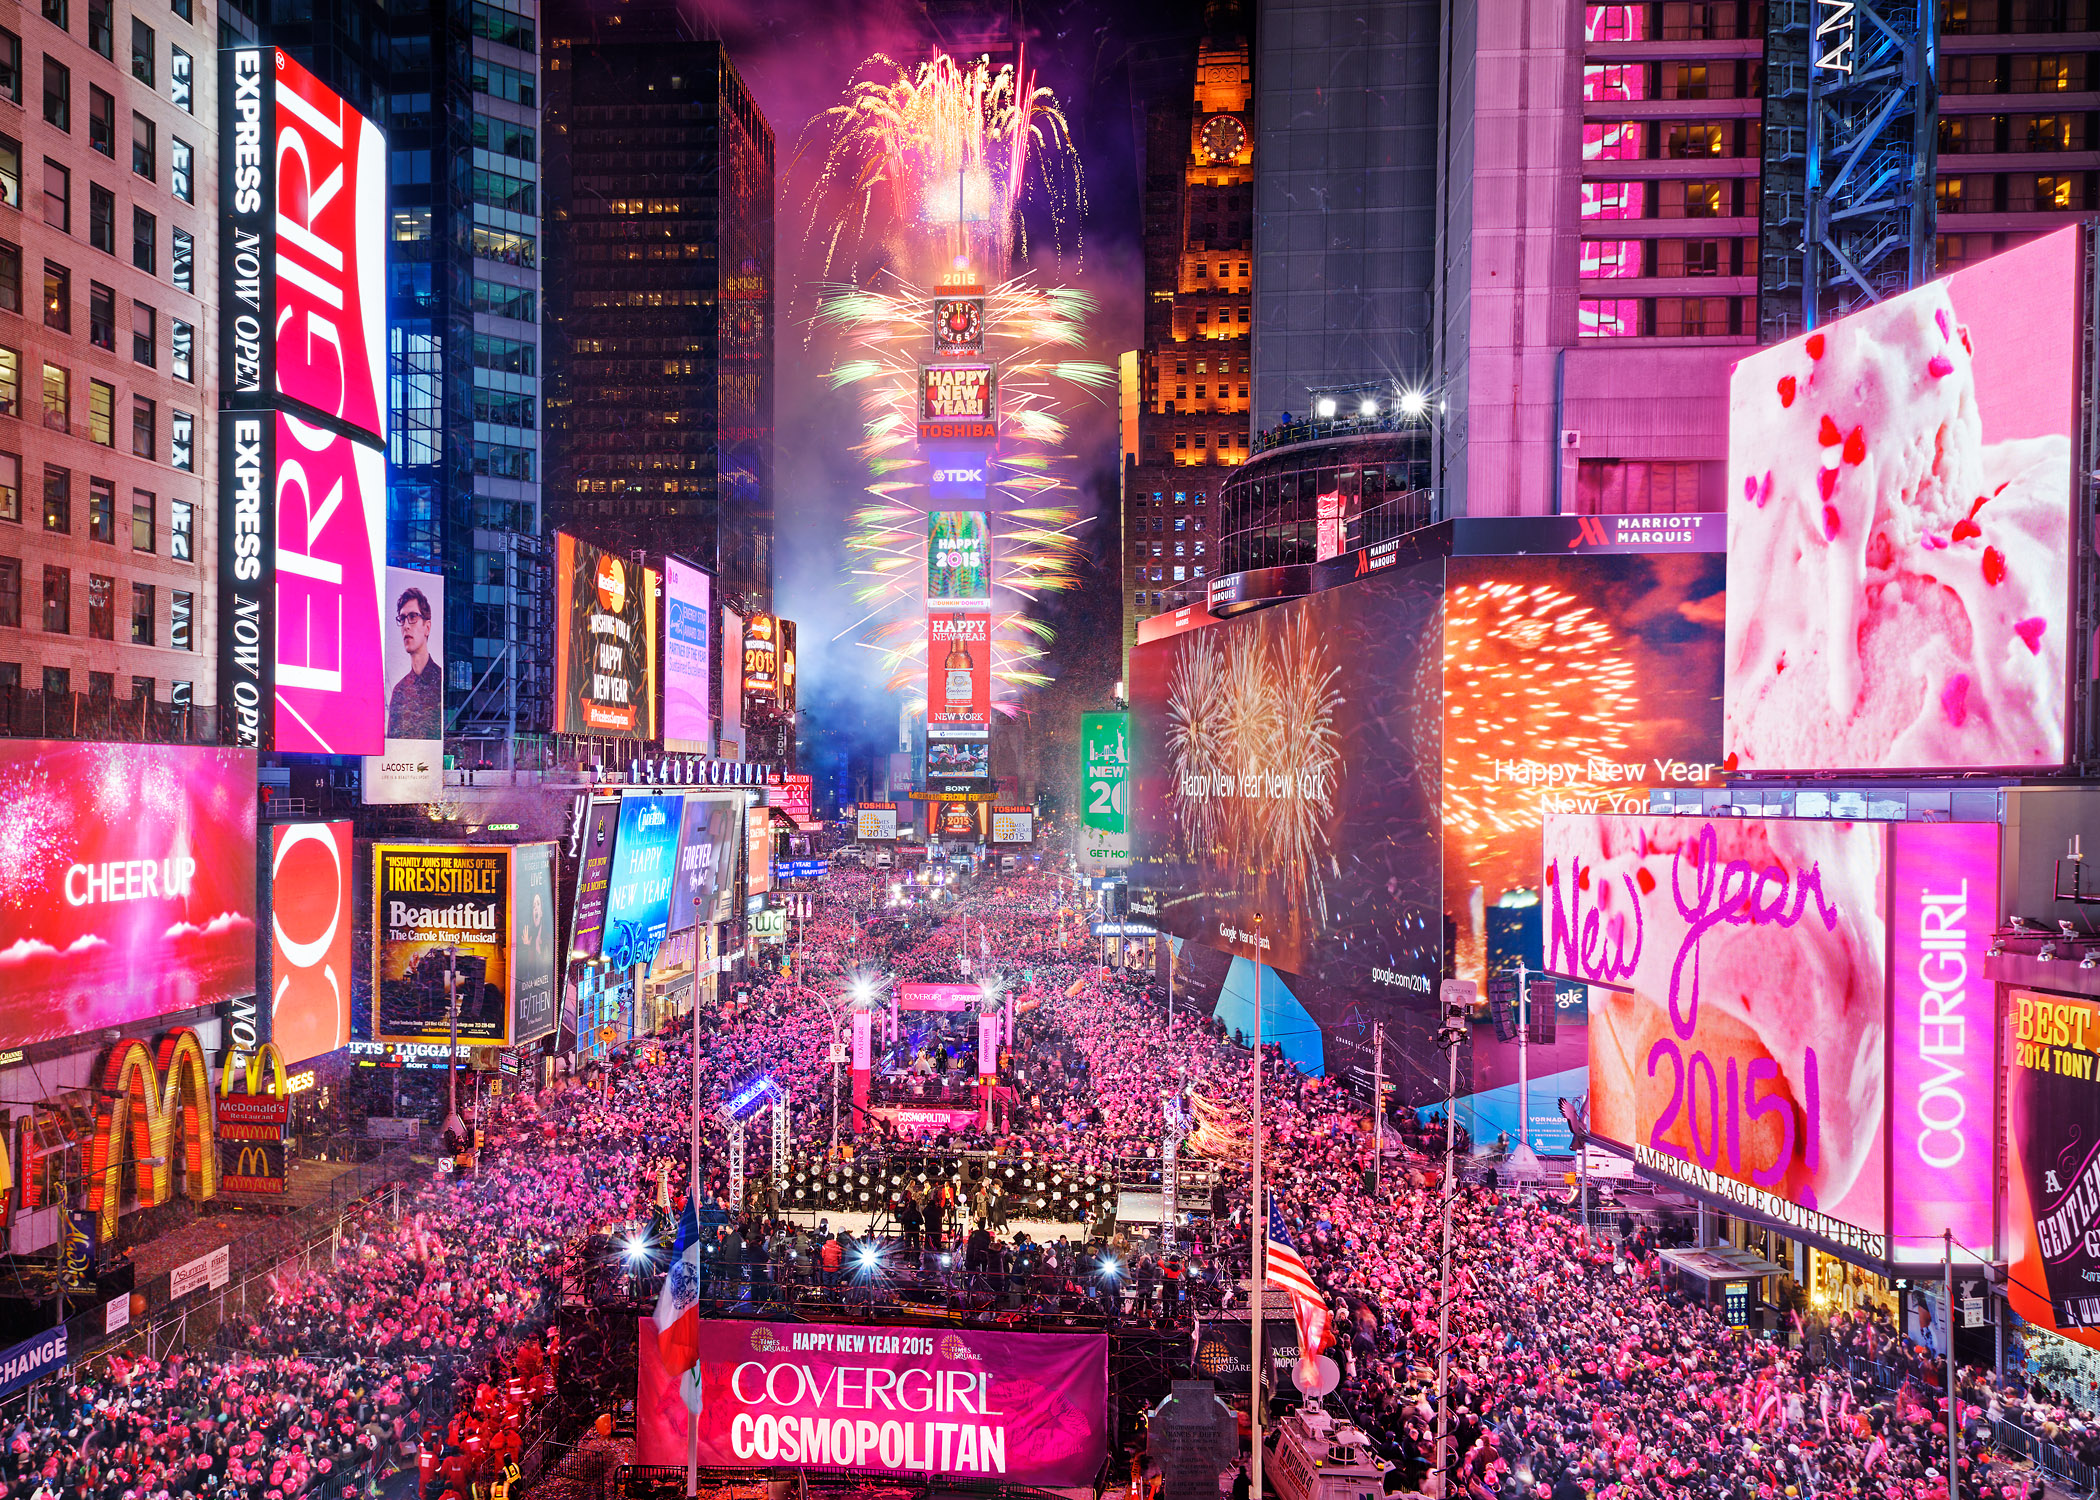 Want to watch the Times Square New Year’s Eve ball drop? I’ve got a webcast for that!